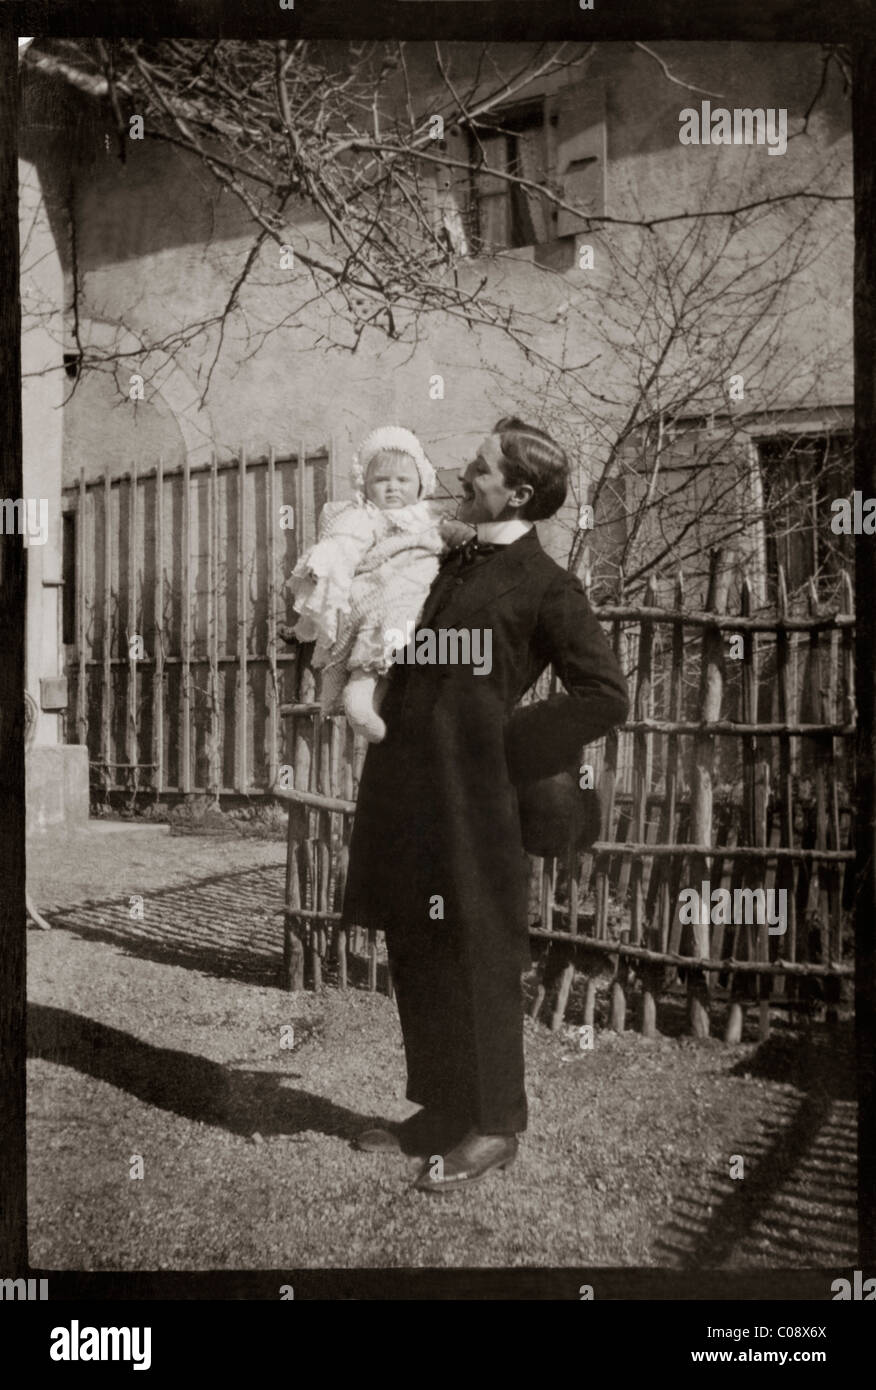 Old Photograph Of Man Holding Baby March 1907 Restored Picture Stock Photo